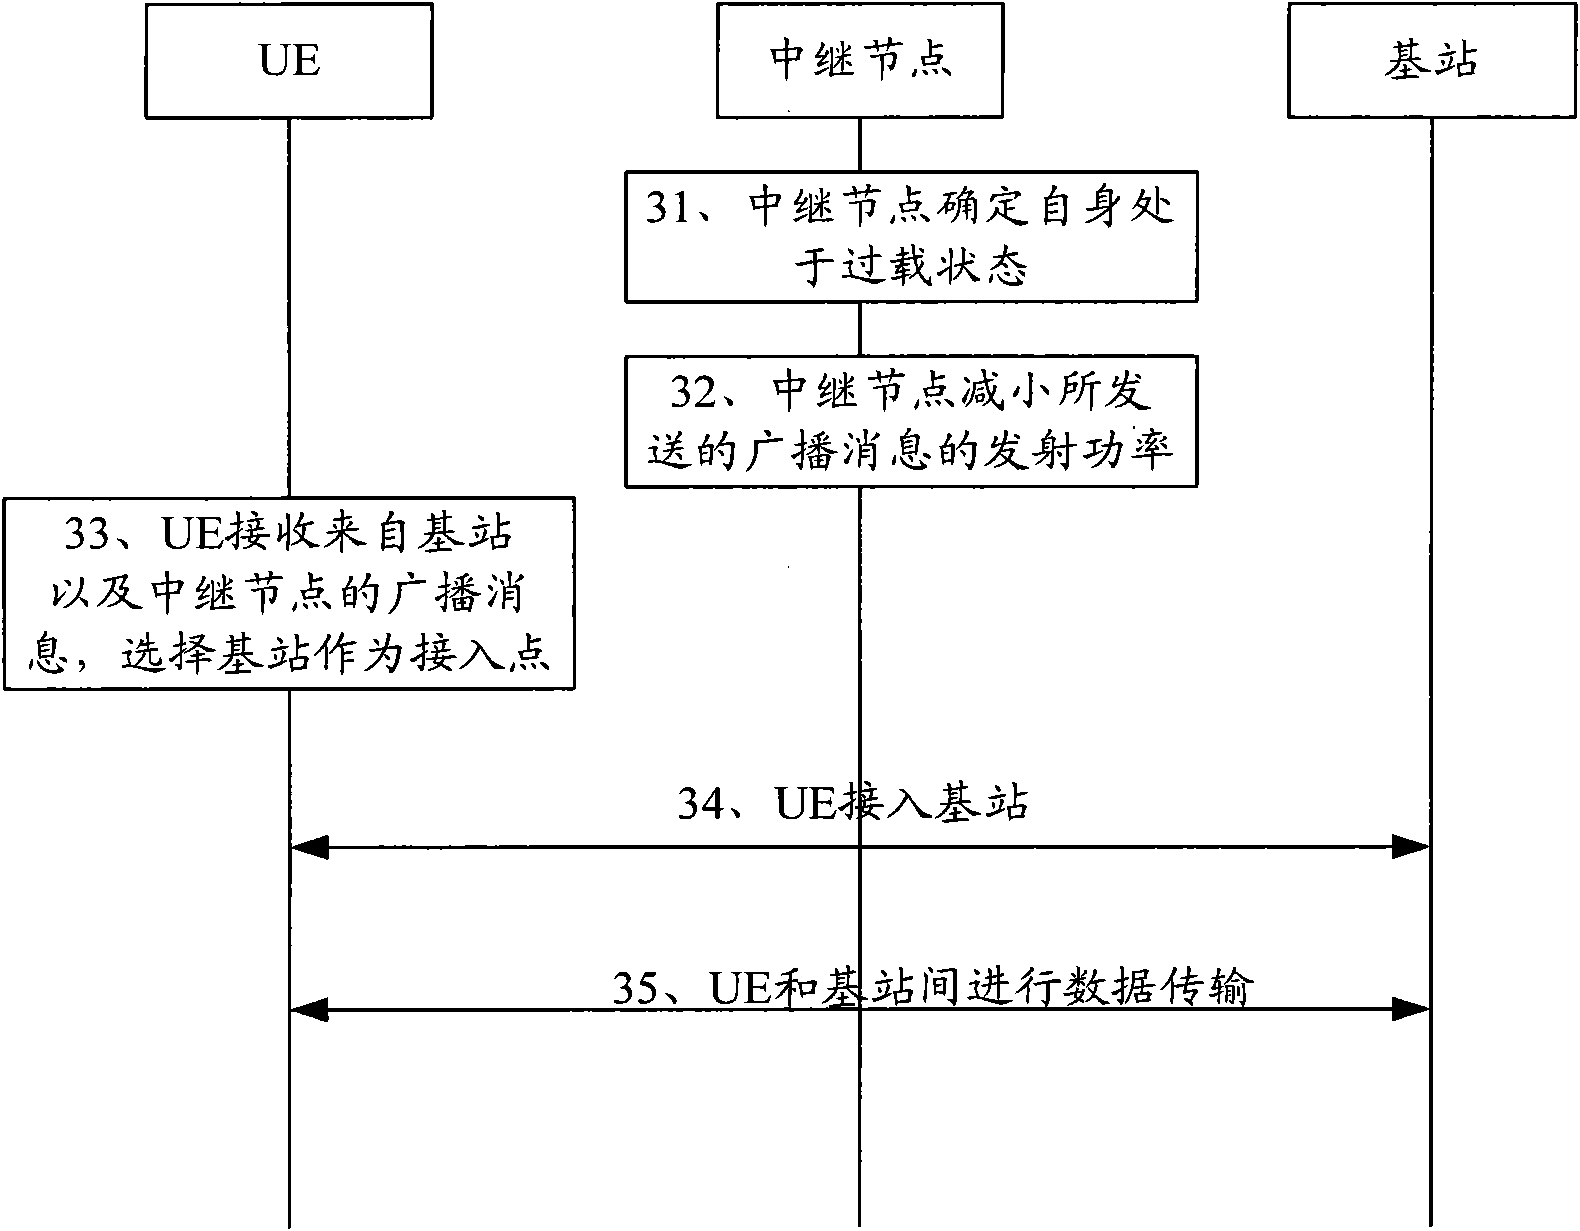 Consumer terminal access method, system and device in high level long-term evolutionary progression system